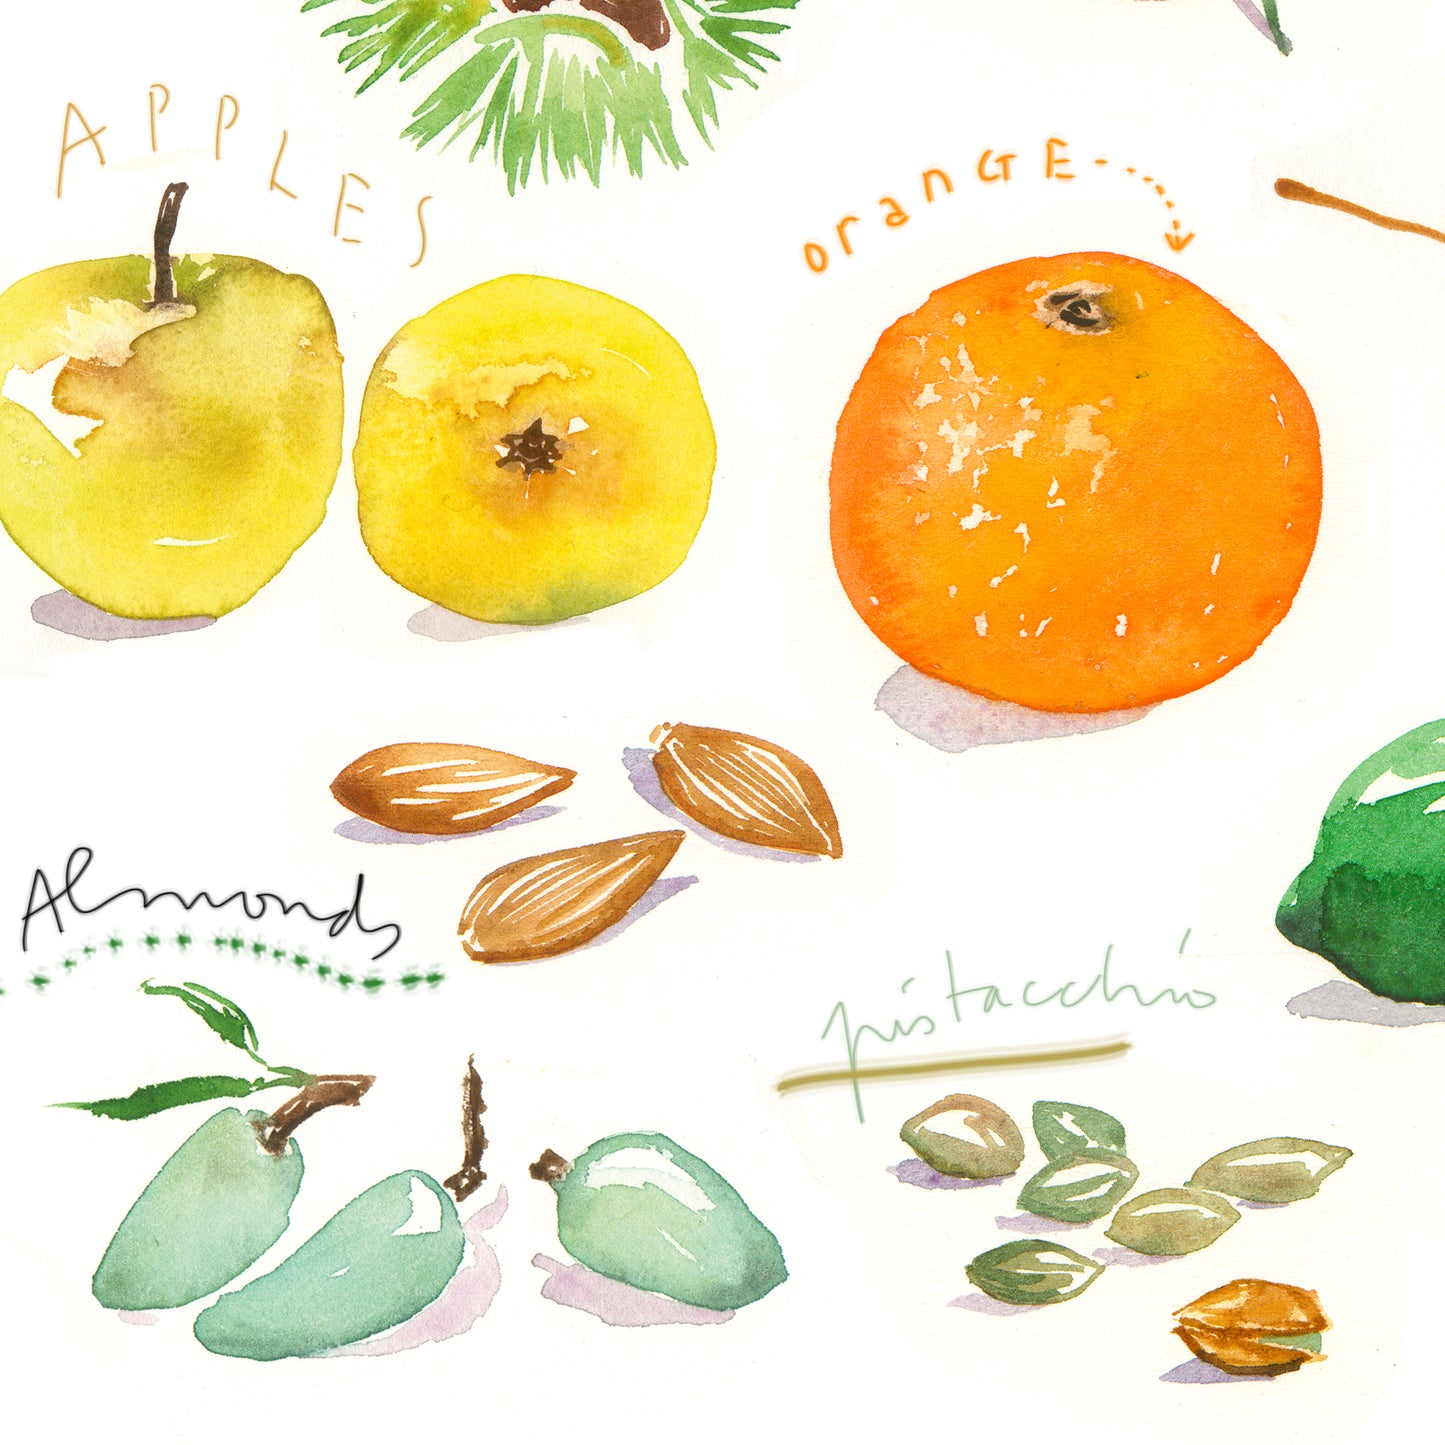 Winter fruits - In English